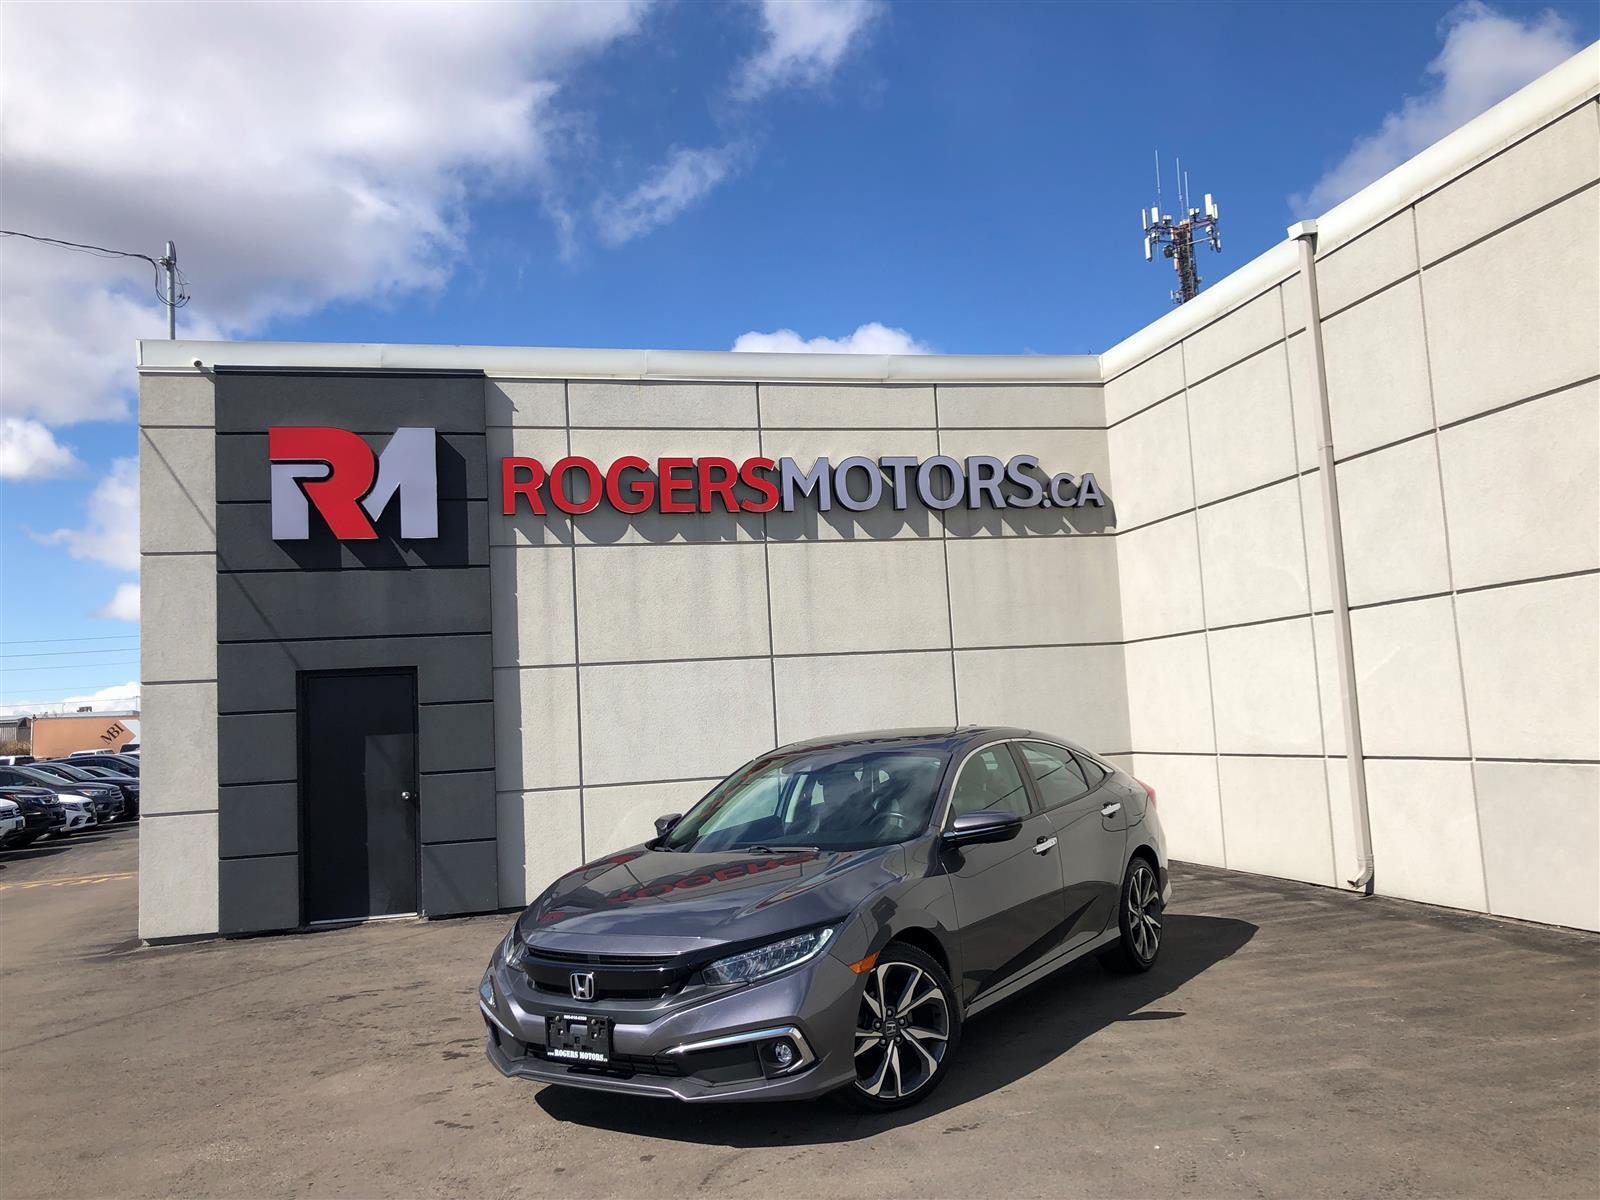 2020 Honda Civic TOURING - NAVI - SUNROOF - LEATHER - TECH FEATURES